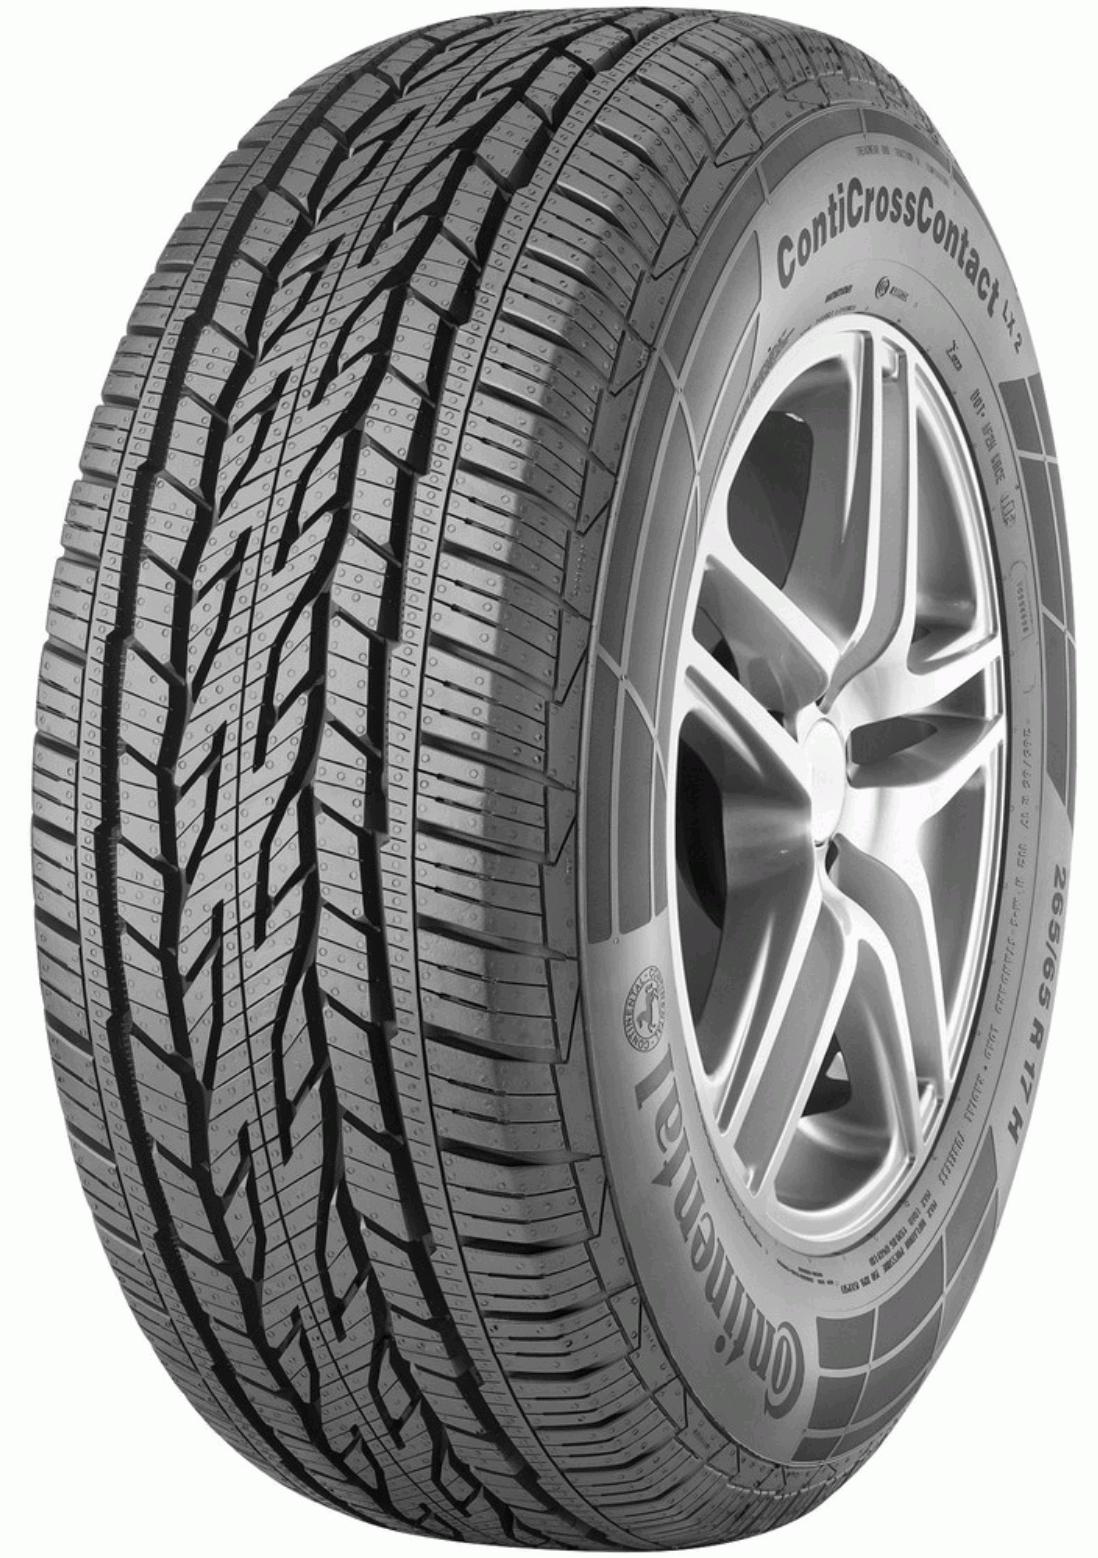 Continental ContiCrossContact LX 2 - Tire Reviews and Tests